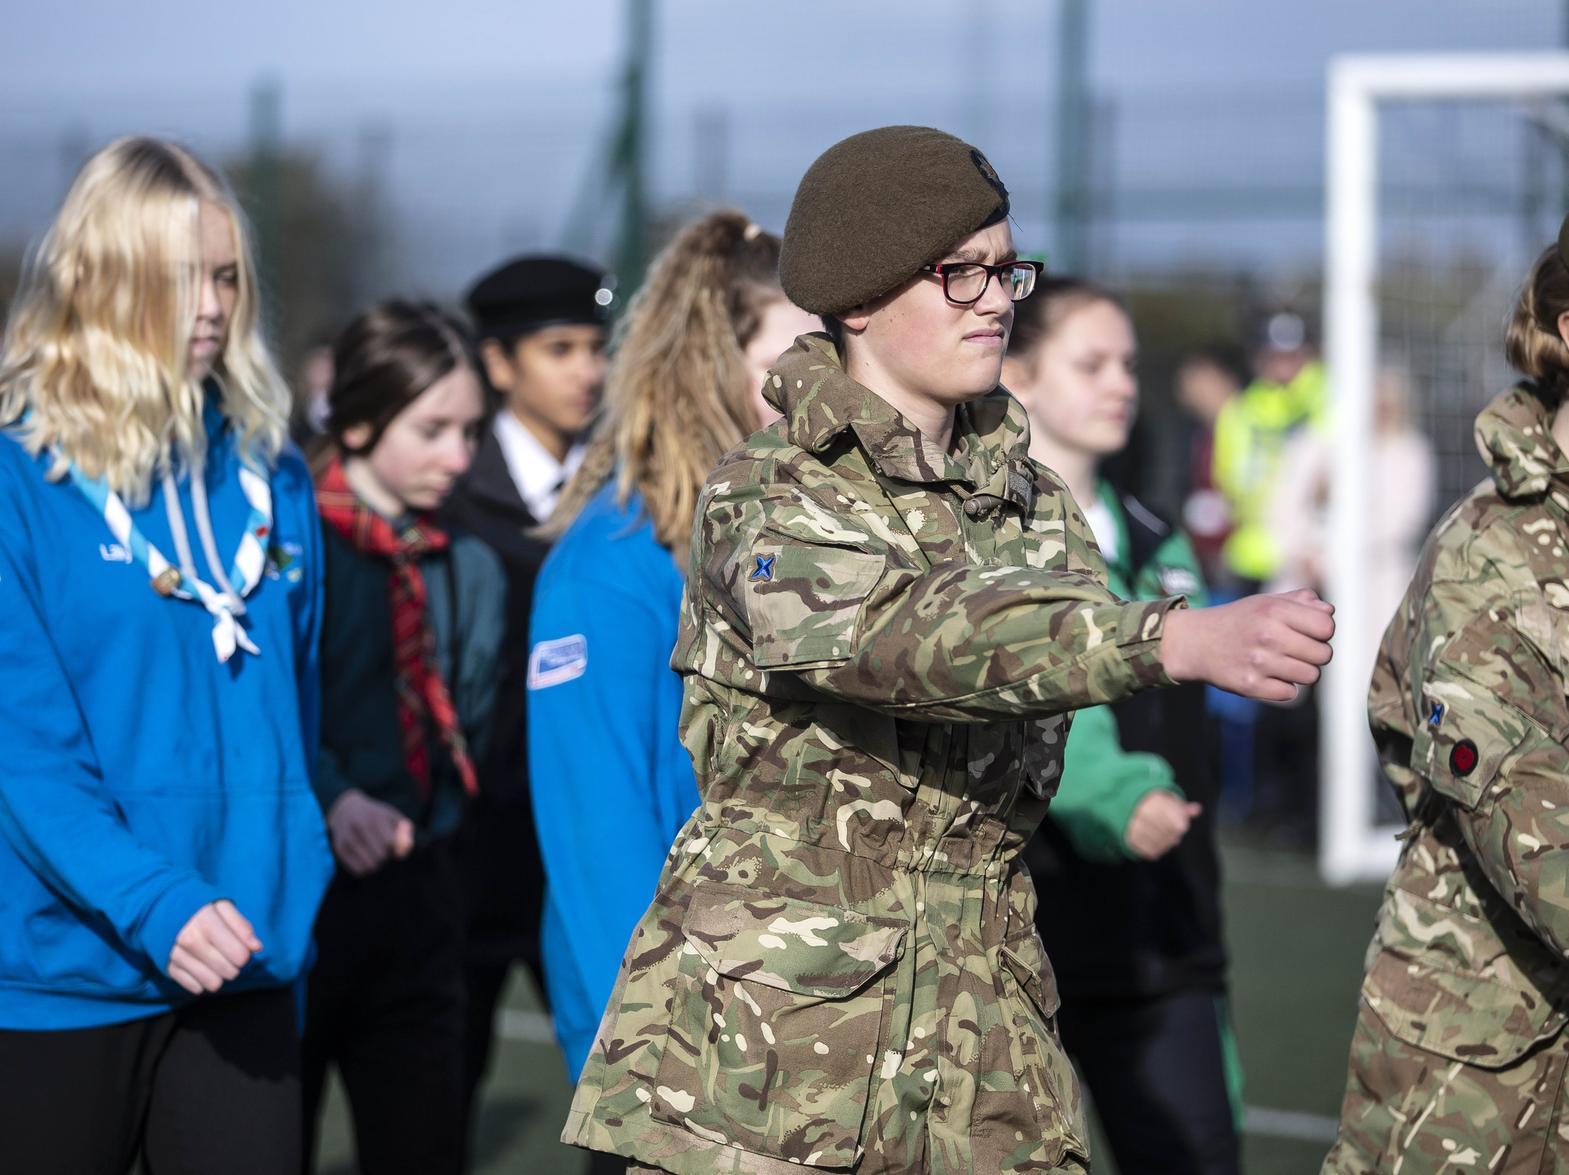 Combined Cadet Forces allow pupils to take part in army, navy and air force services.